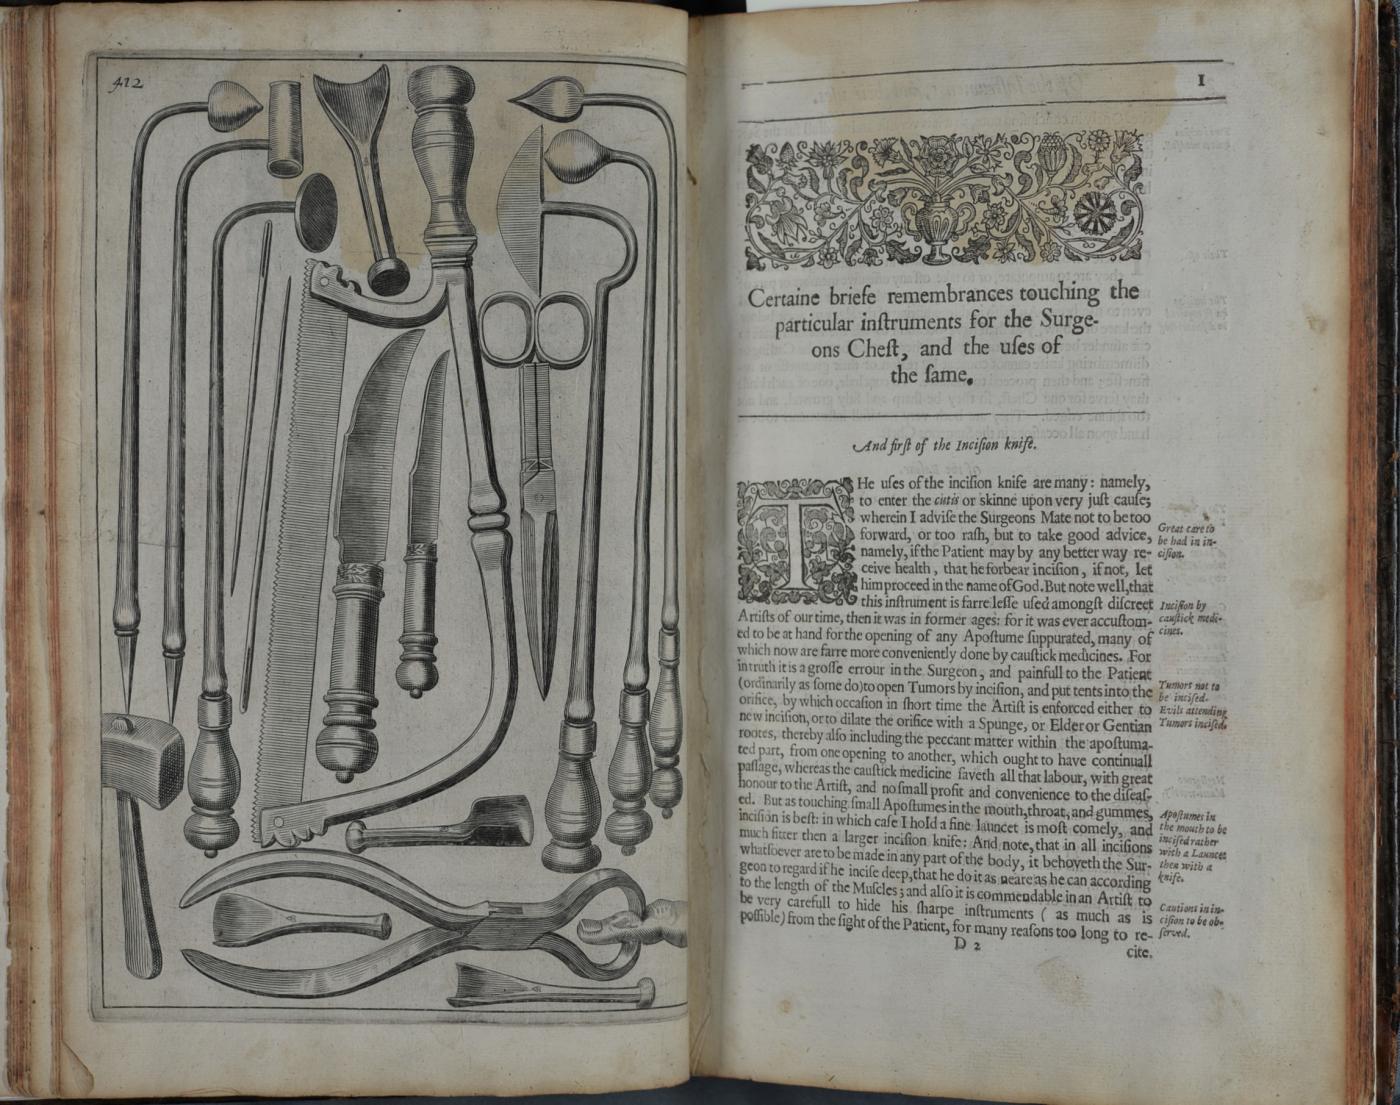 An image showing 'Pages from John Woodall's The surgeons mate (RMG reference: PBP3639)'